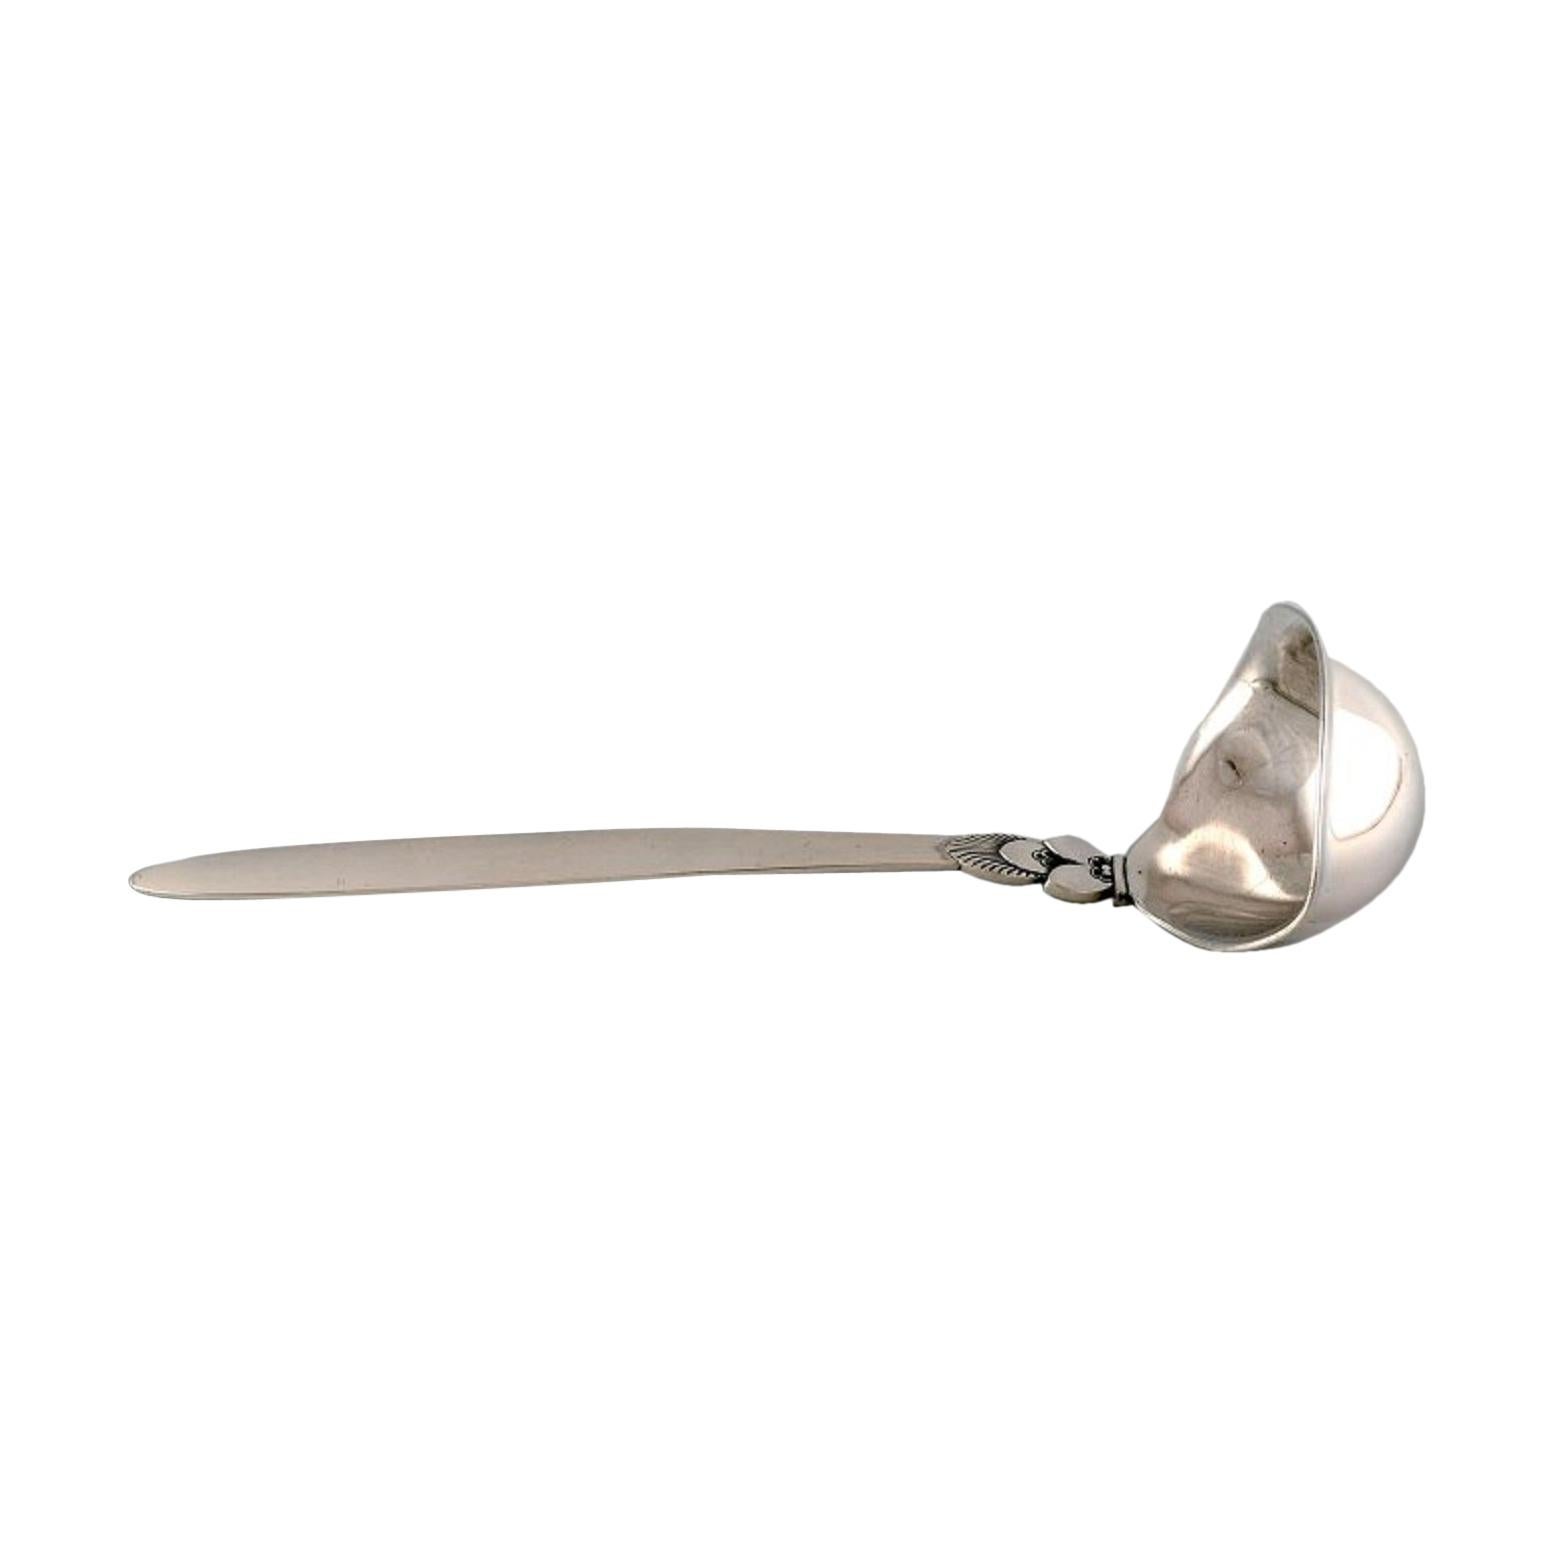 Large Georg Jensen "Cactus" Sauce Spoon in Sterling Silver, Dated 1932